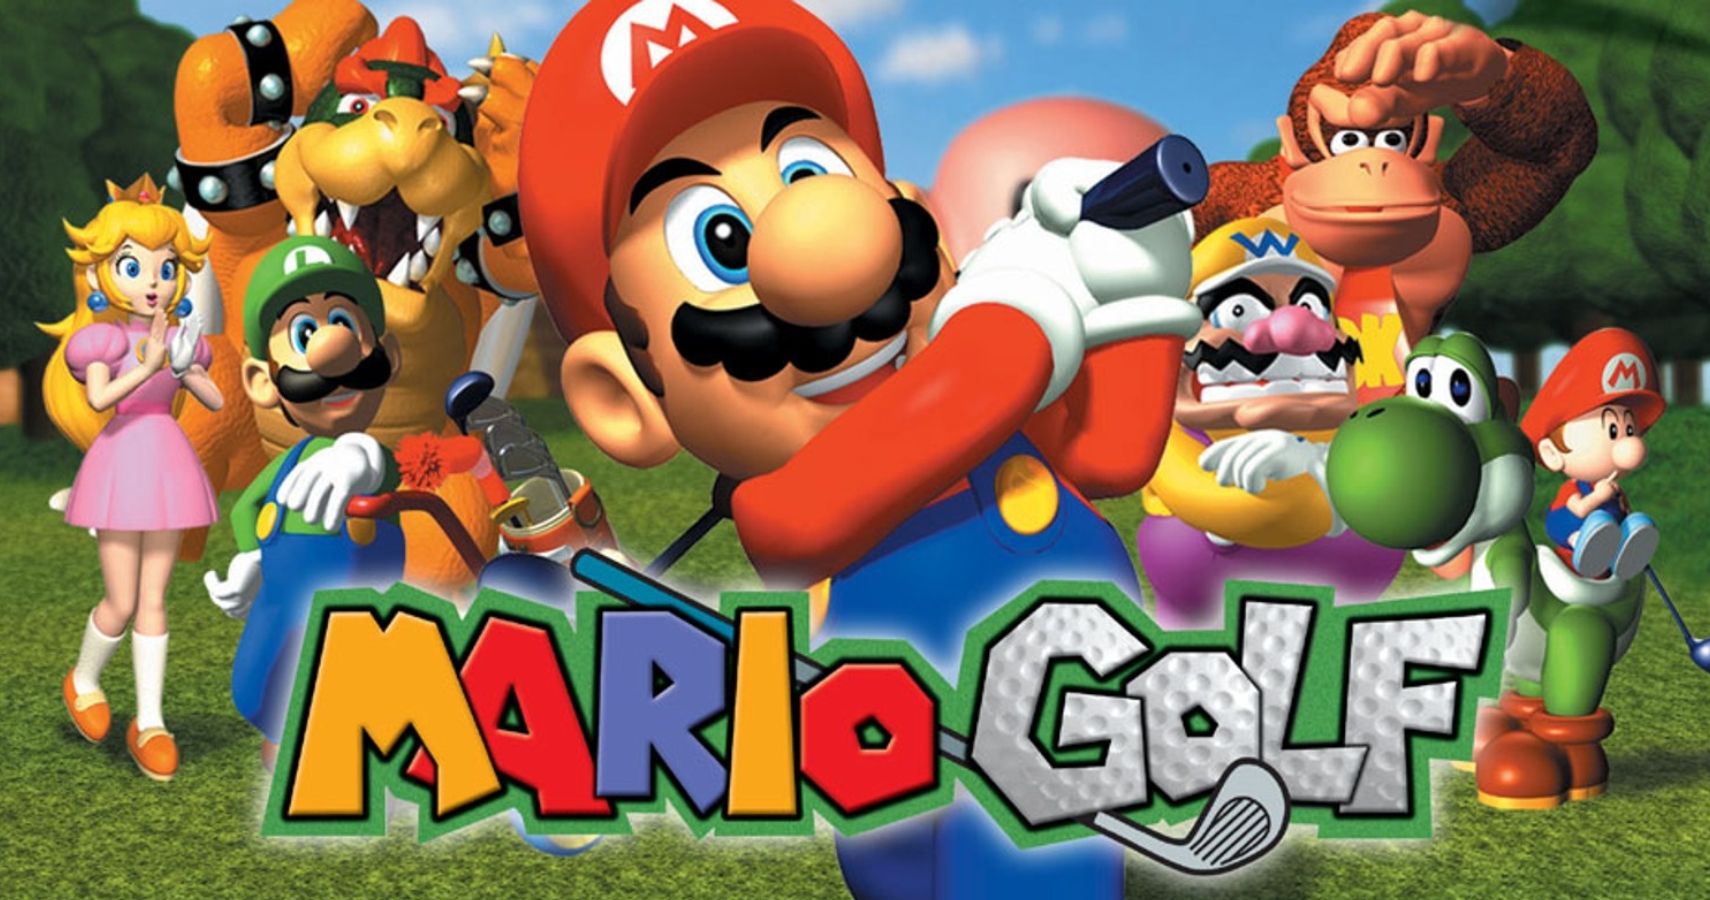 will there be a mario golf for switch